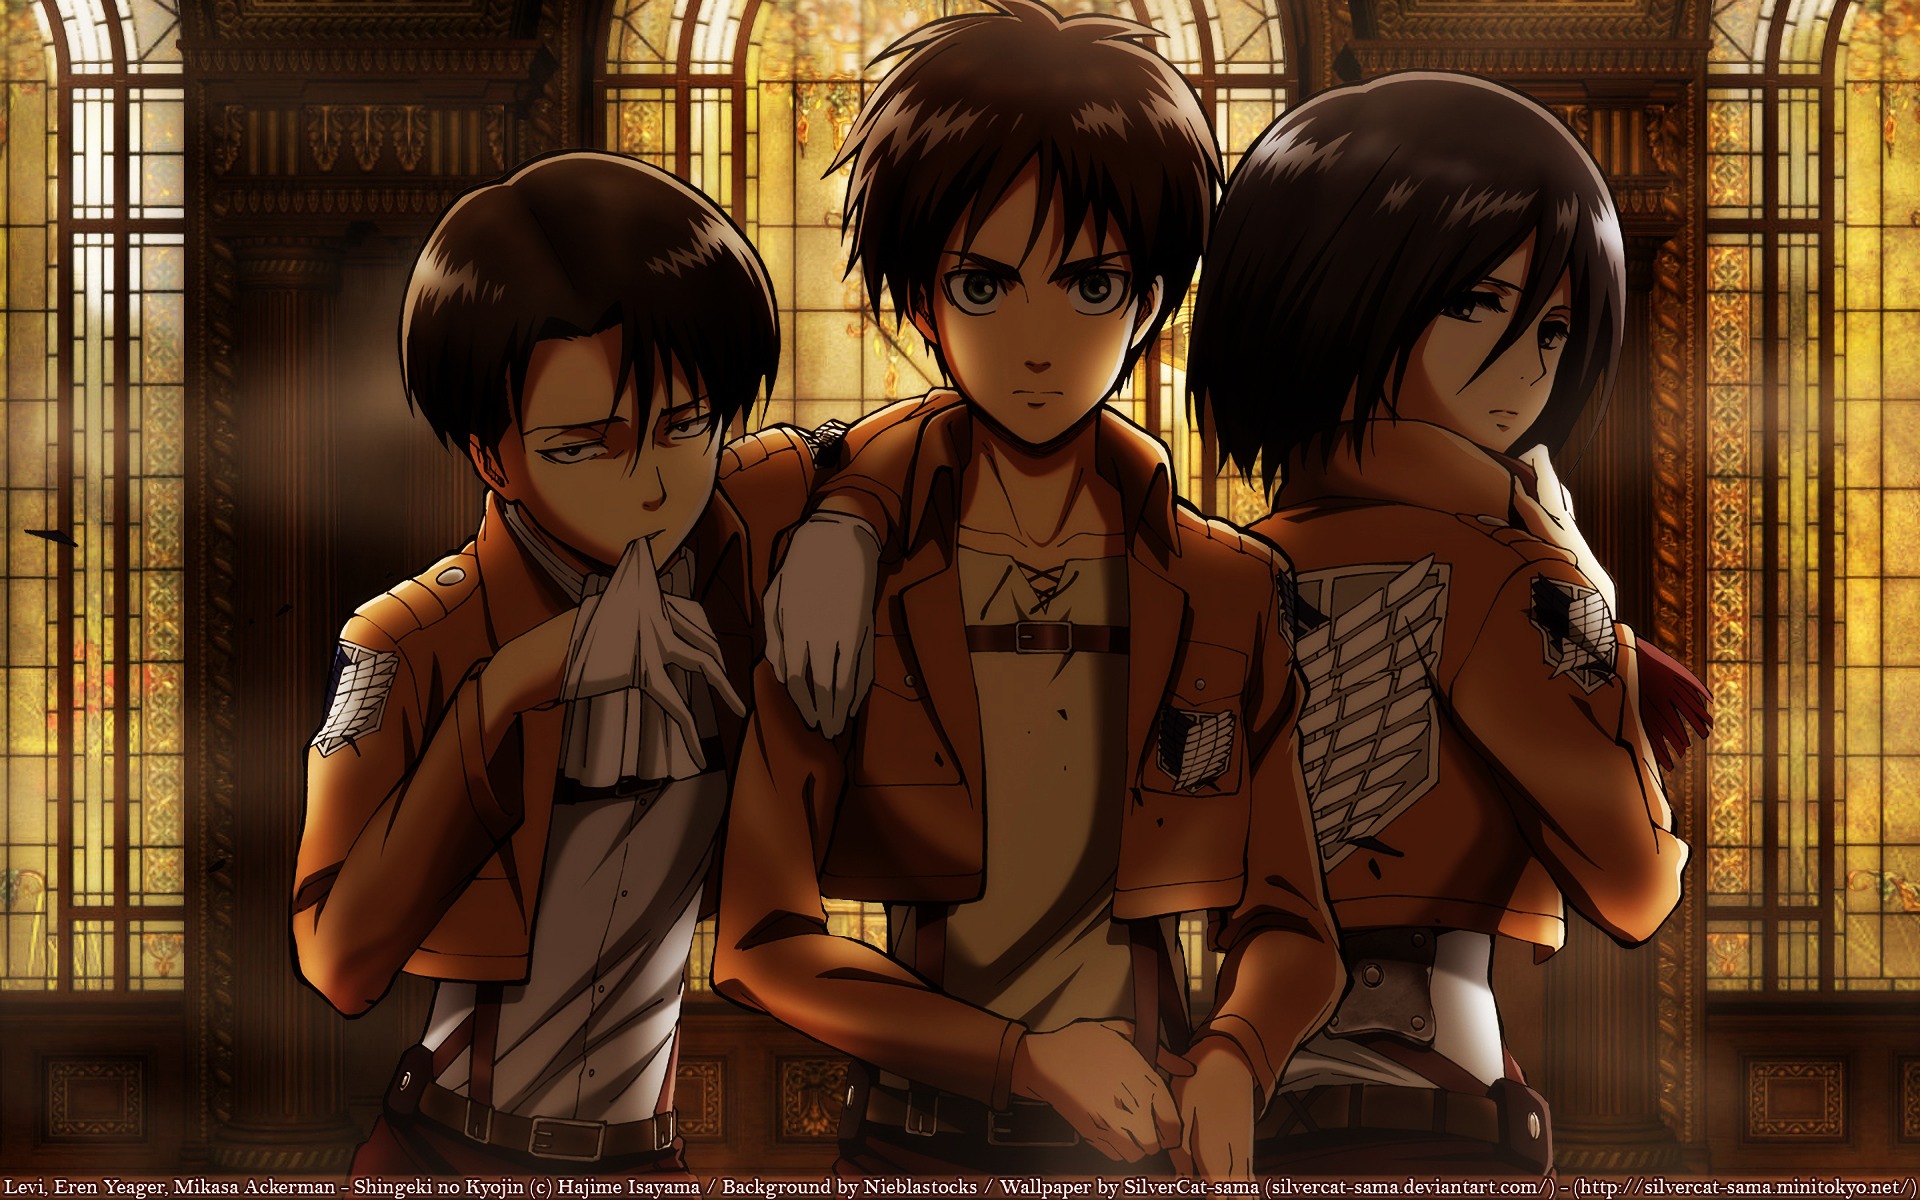 Download wallpaper from anime Attack On Titan with tags: Windows Eren Yeager, Mikasa Ackerman, Levi Ackerman